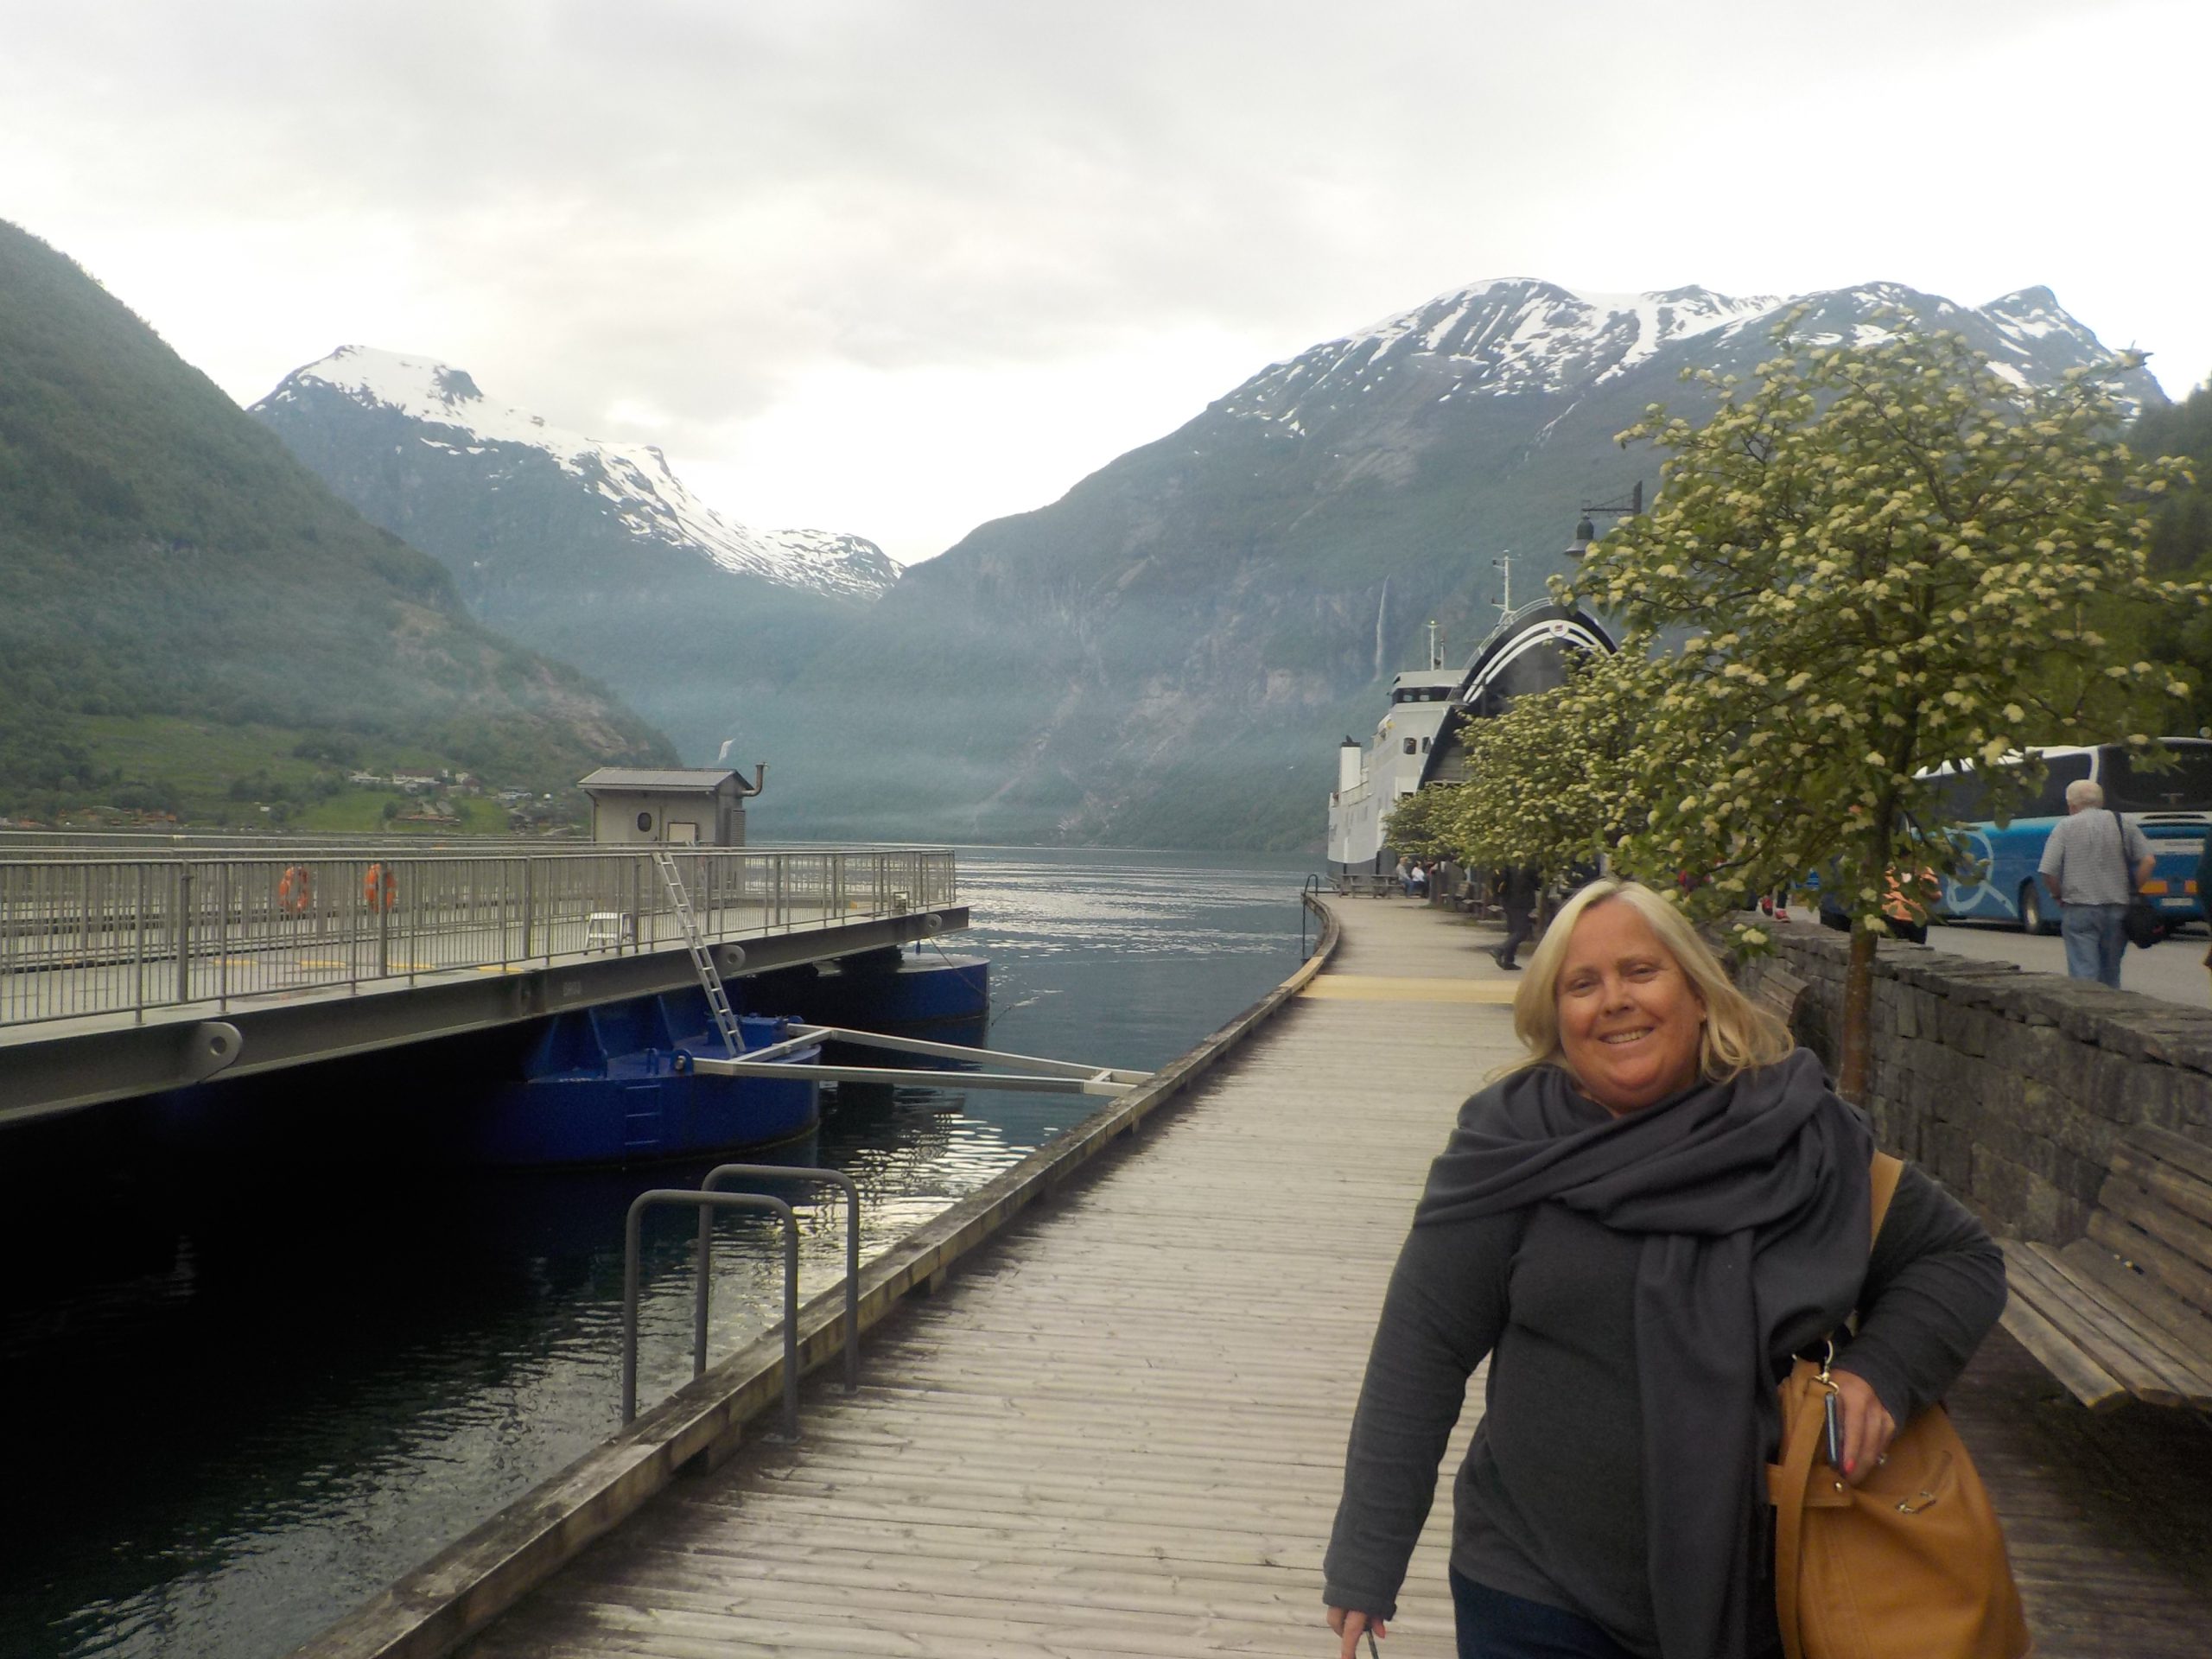 Leaving the ferry at Geiranger